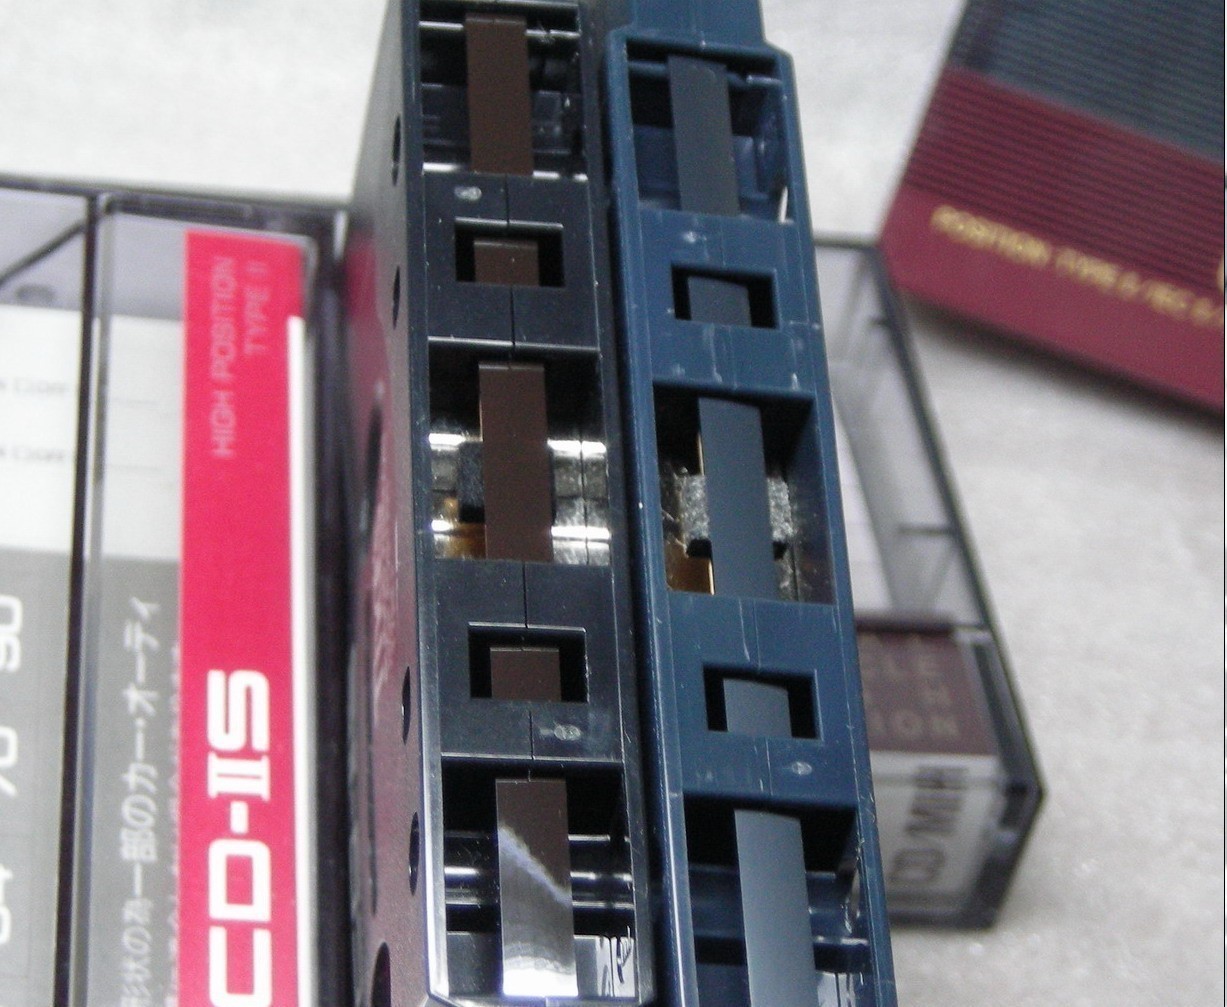 23 Thats CD-MH100 tape color compared CDII-s 70.jpg